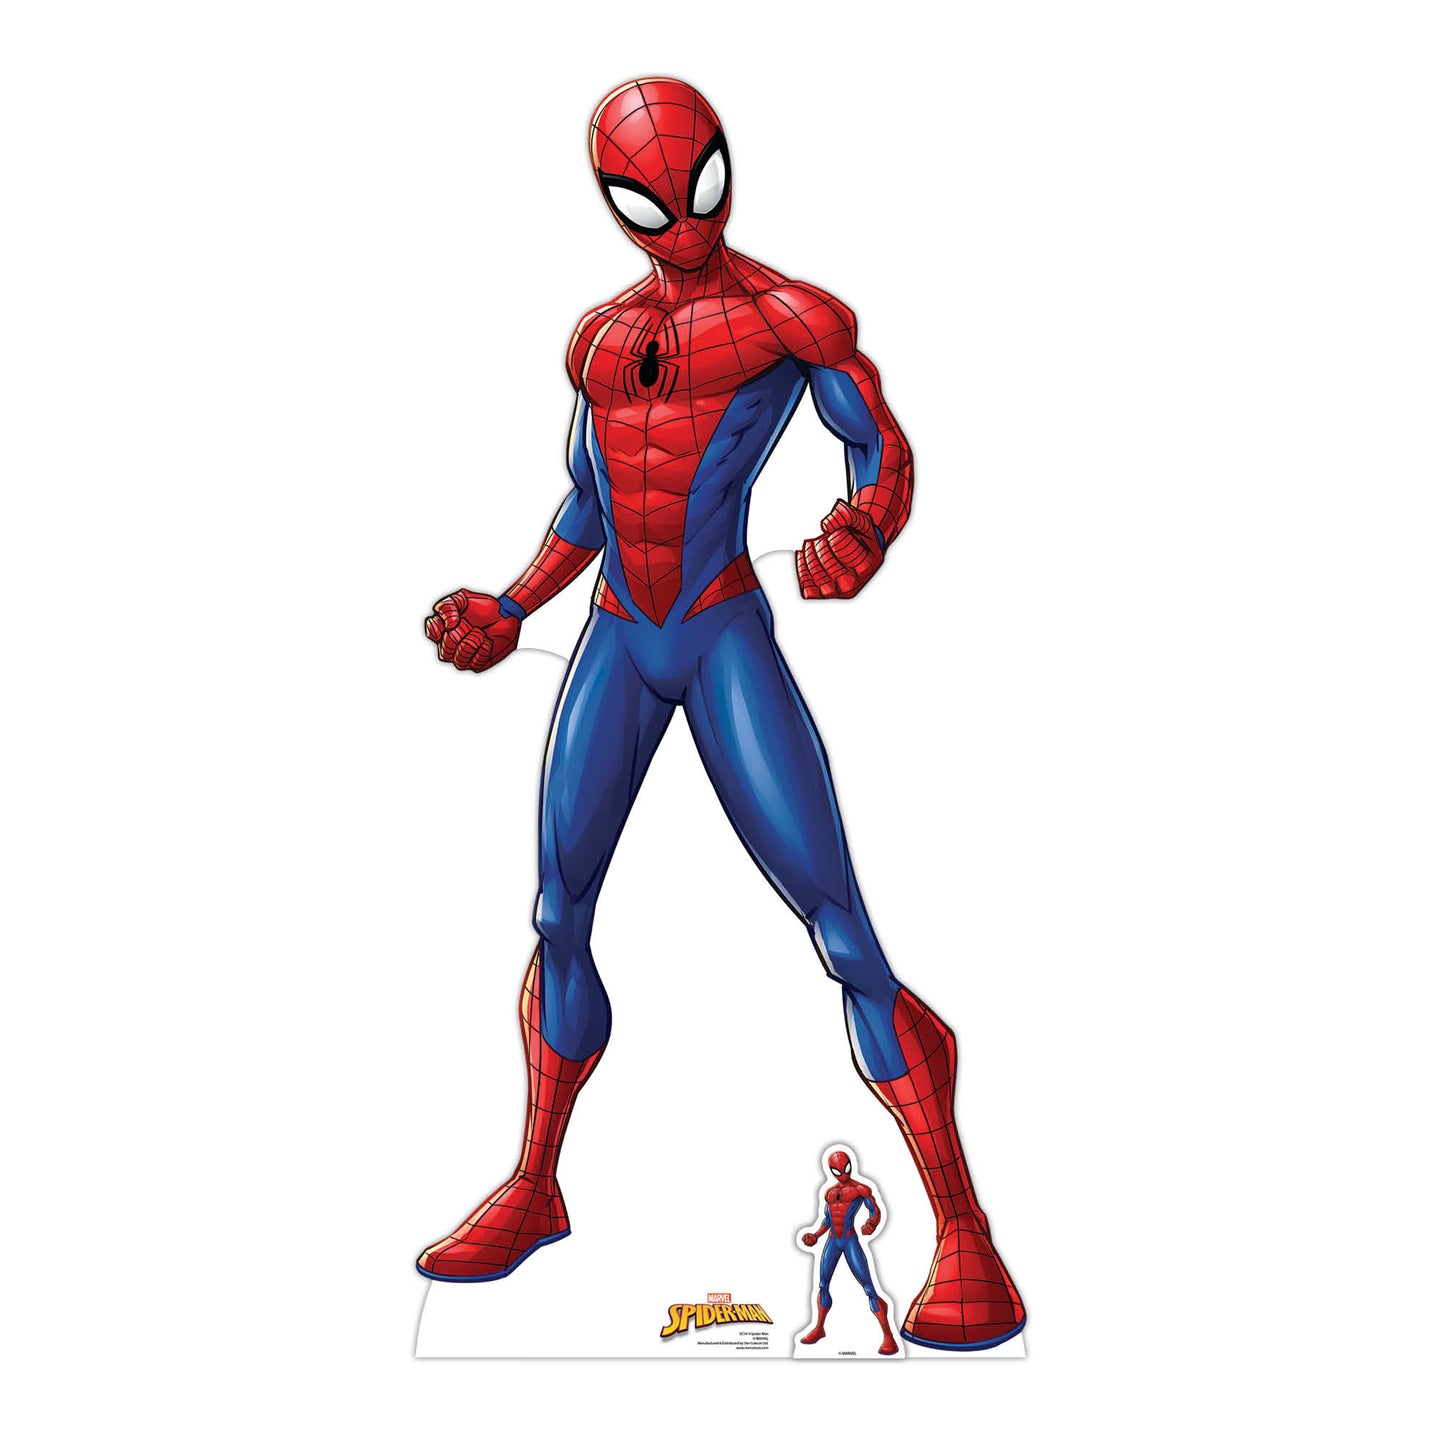 SC1414 Spider-Man Spiderverse Cardboard Cut Out Height 179cm